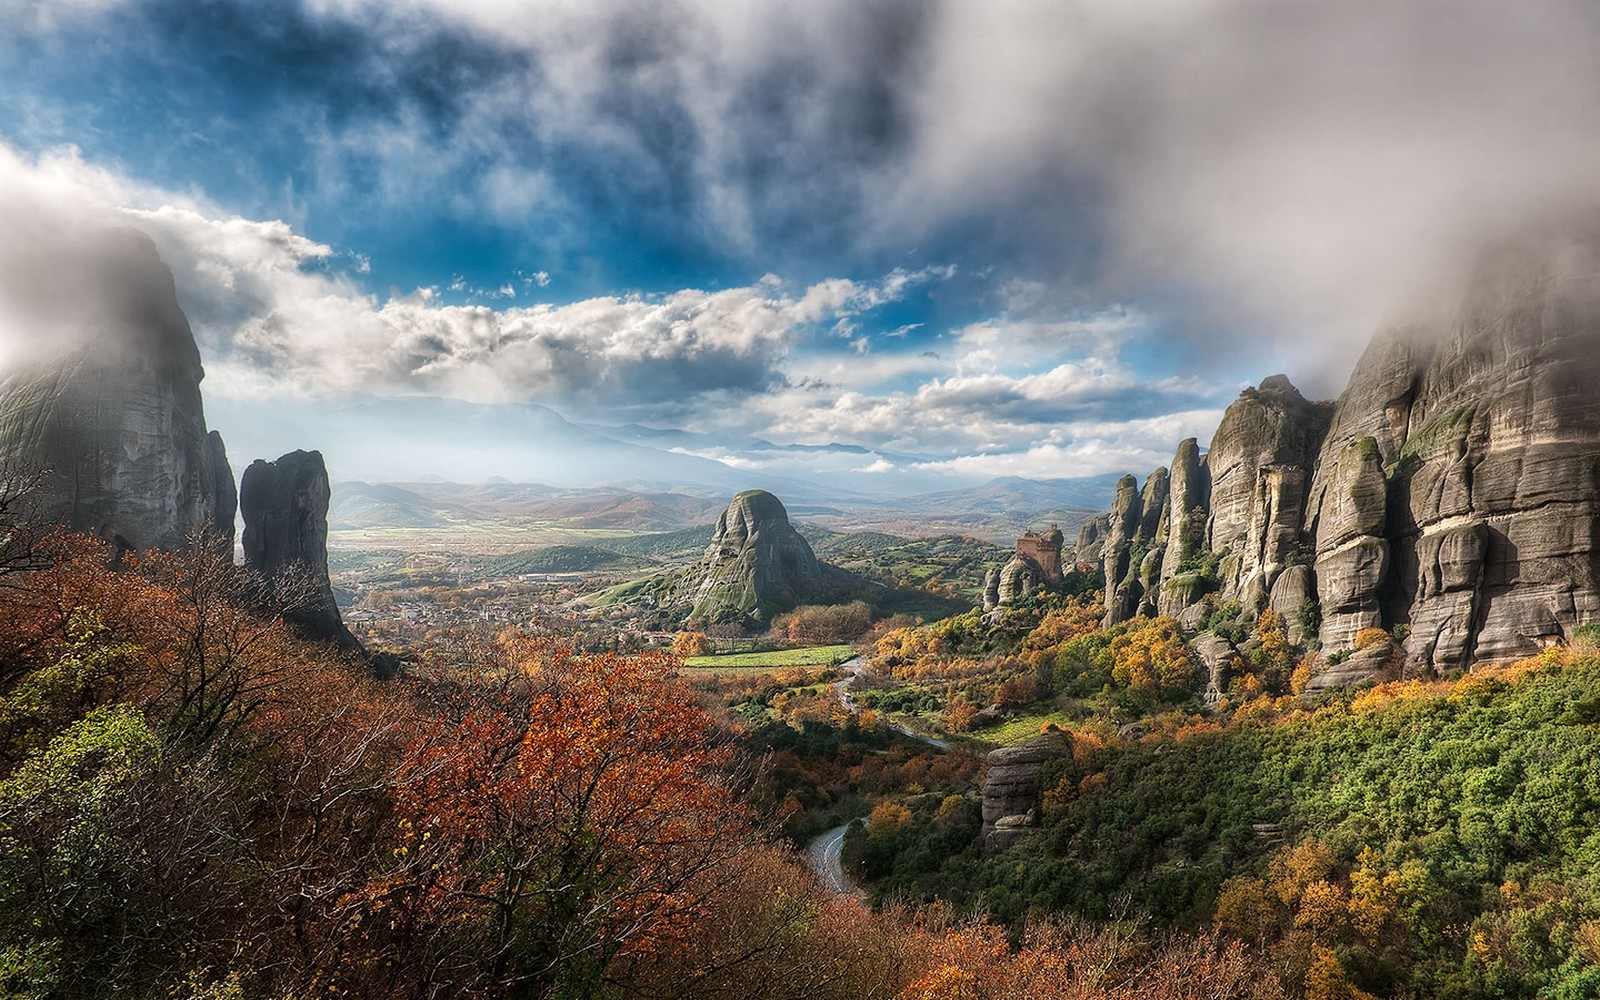 General 1600x1000 nature landscape Greece valley fall clouds rocks forest road mist mountains